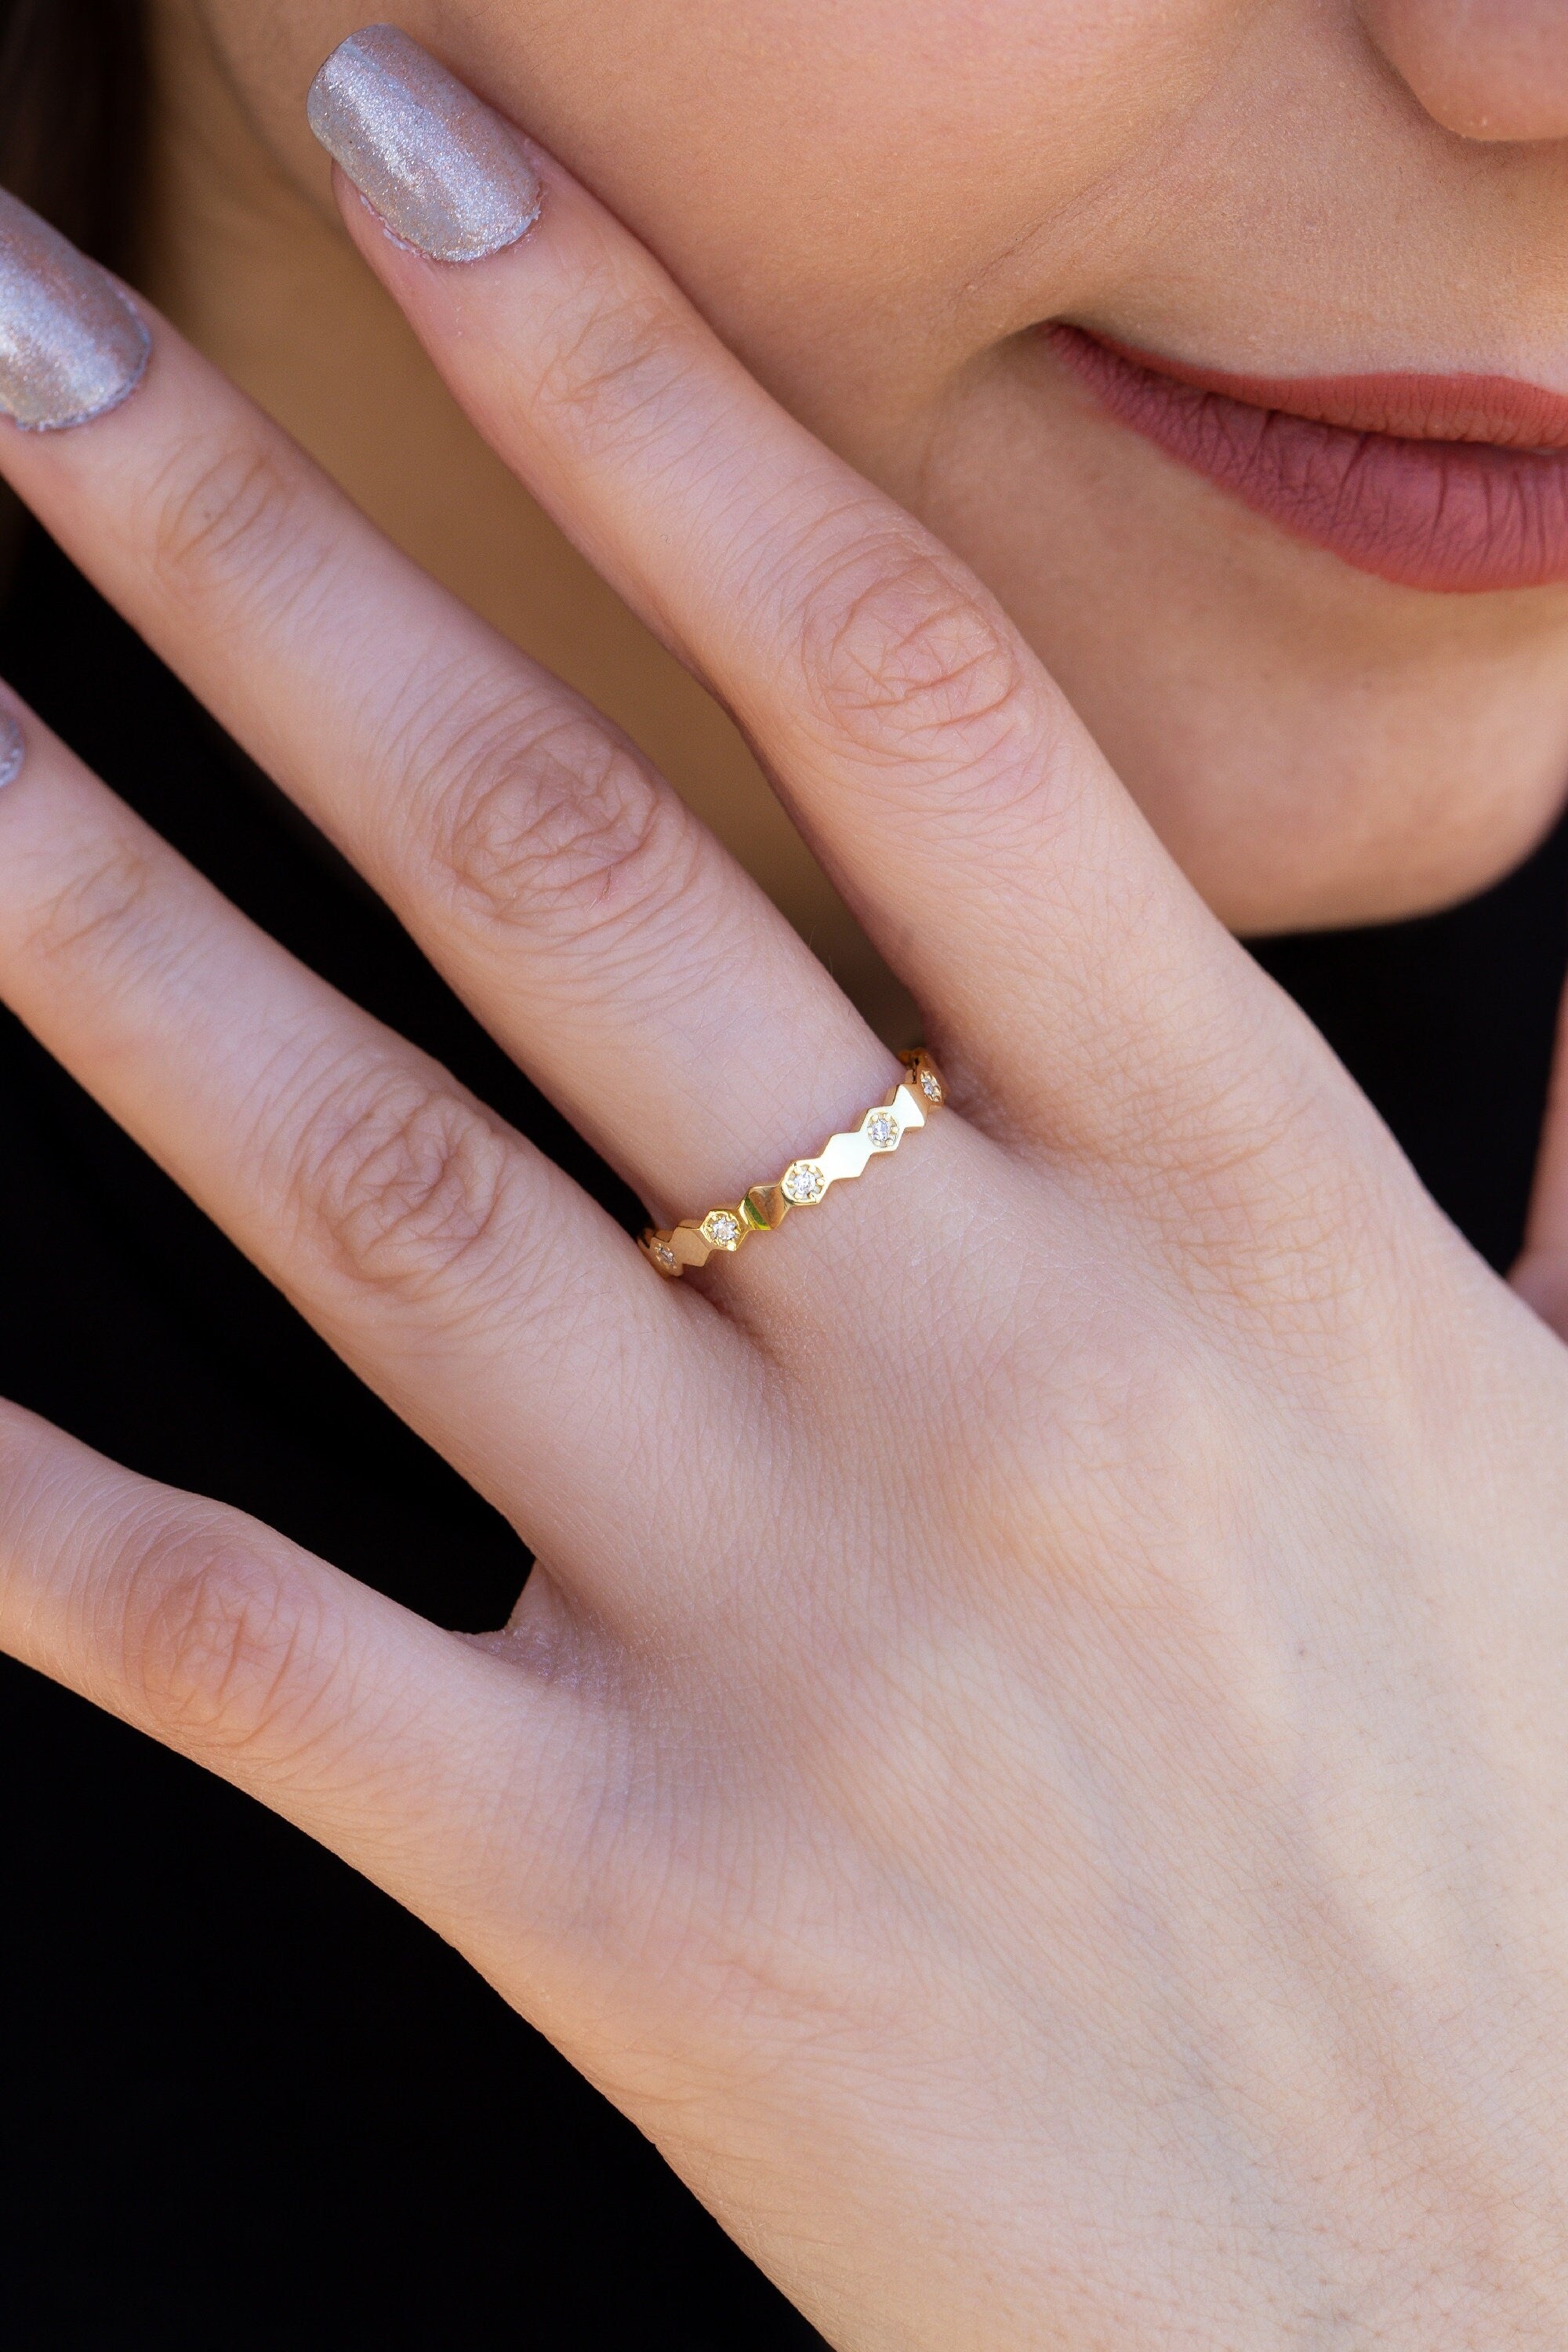 14k Gold Ring / Minimalist Ring /Geometric Ring 14K Gold Ring/Anniversary Gift For Wife / Gift For Mother Day / Mother Day Jewelry